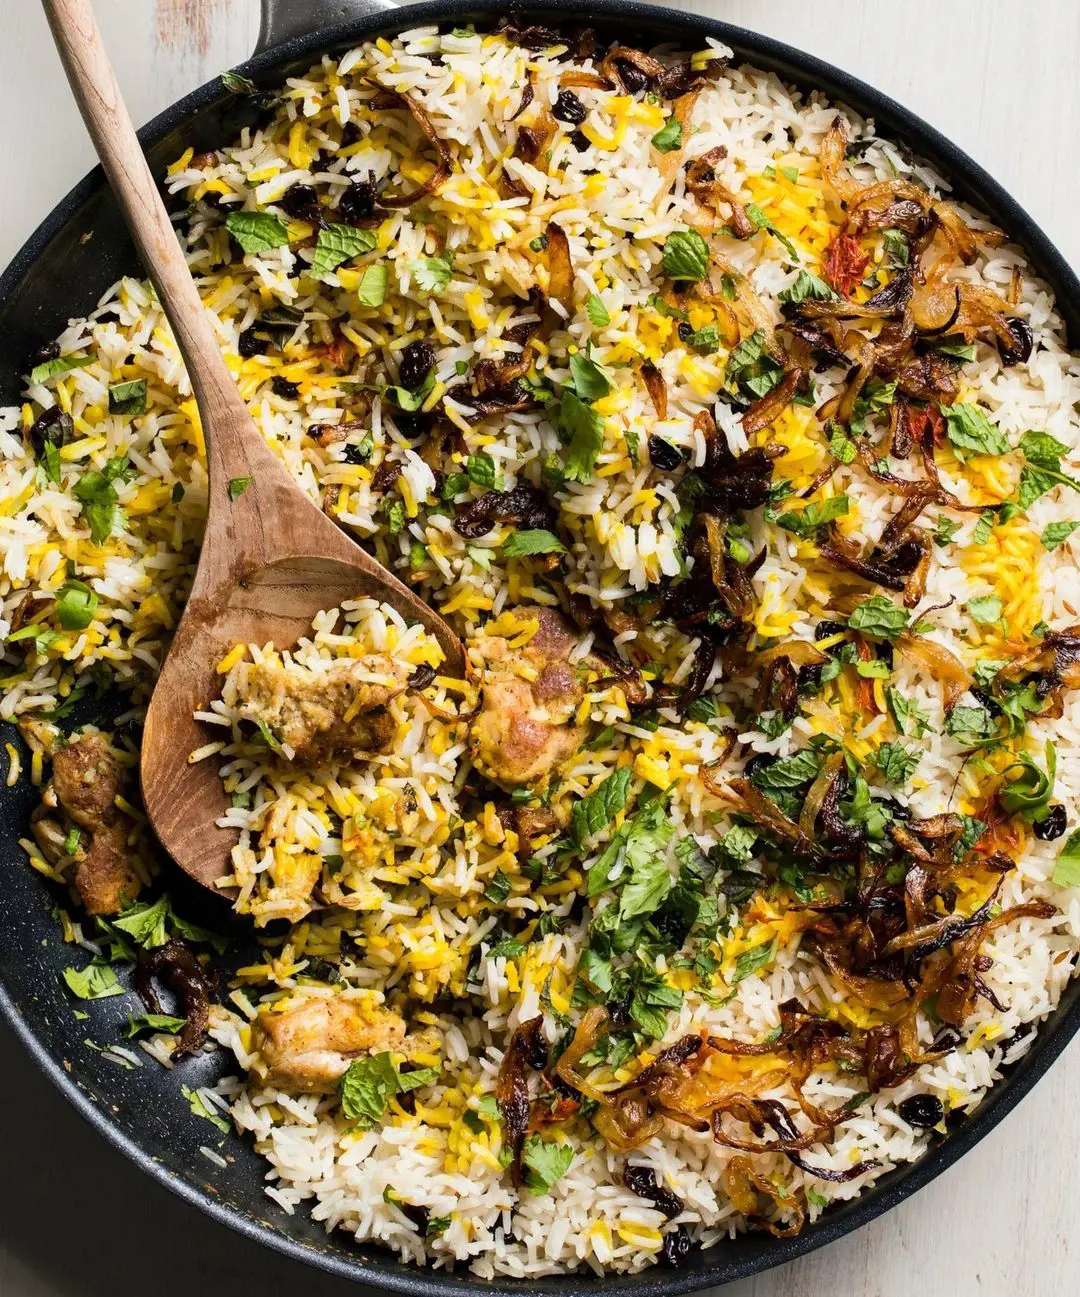 Flavors in a Biryani is balanced by sweet caramelized onions with aromatics and traditional Indian spices